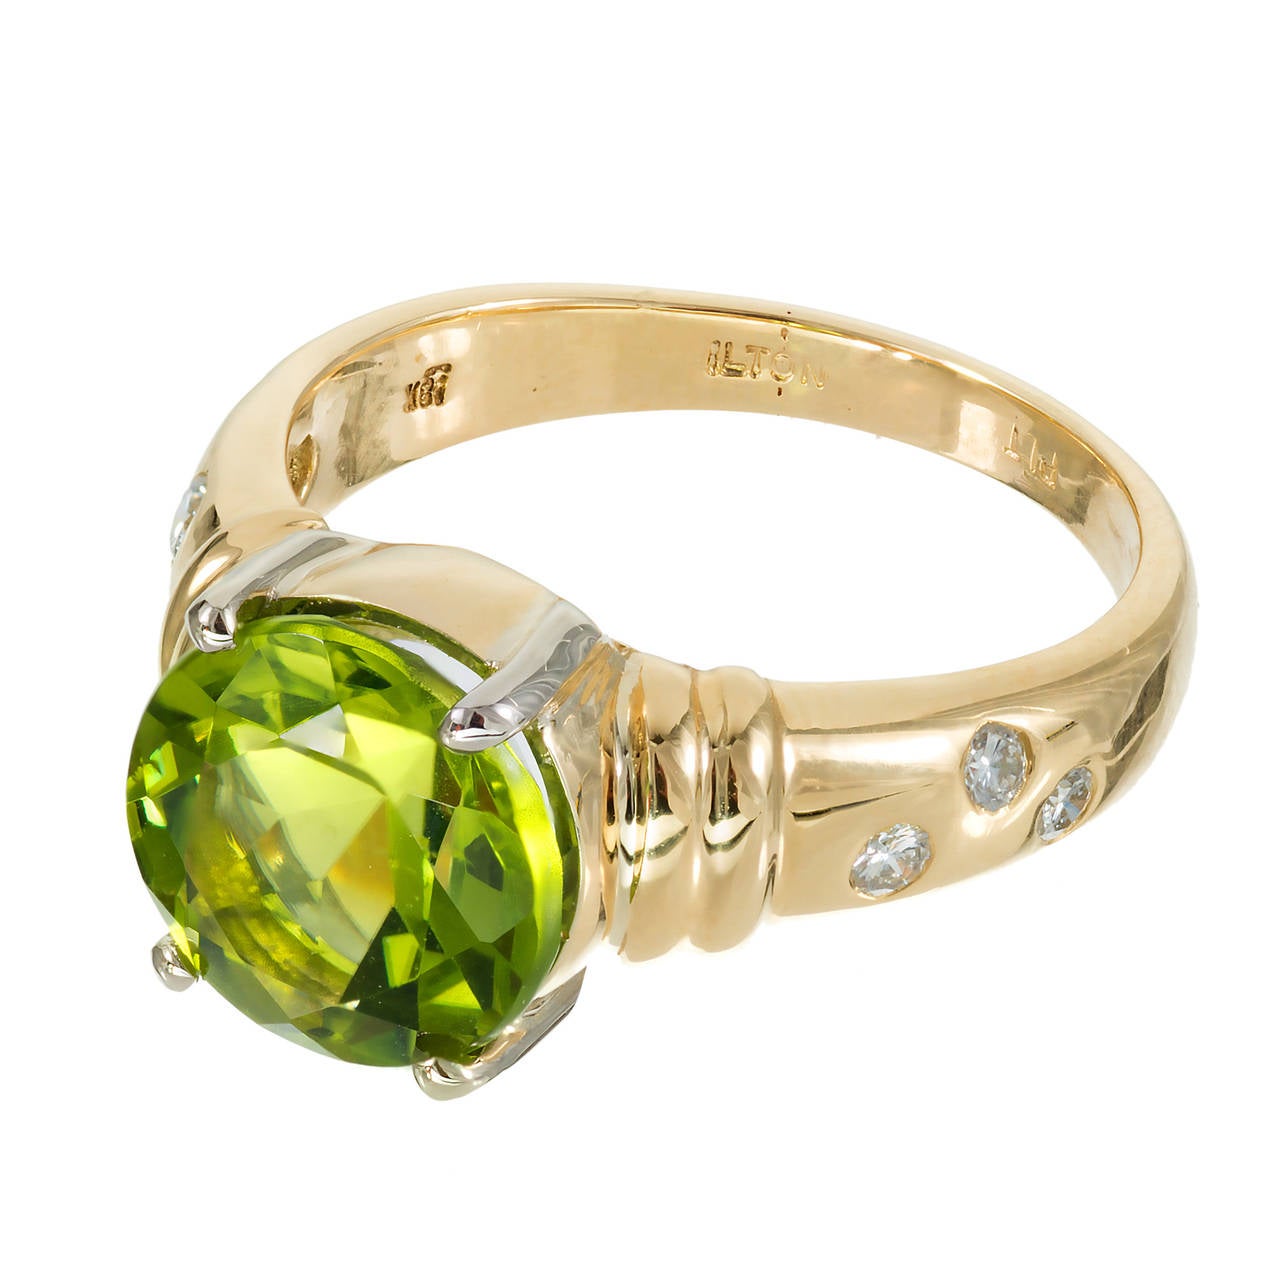 Bright and beautiful round Peridot ring signed Ilton with a 3.90ct Peridot in an 18k yellow gold setting with Platinum prongs and diamond shank.

1 round medium green Peridot, approx. total weight 3.90cts, VS
6 round full cut diamonds, approx. total